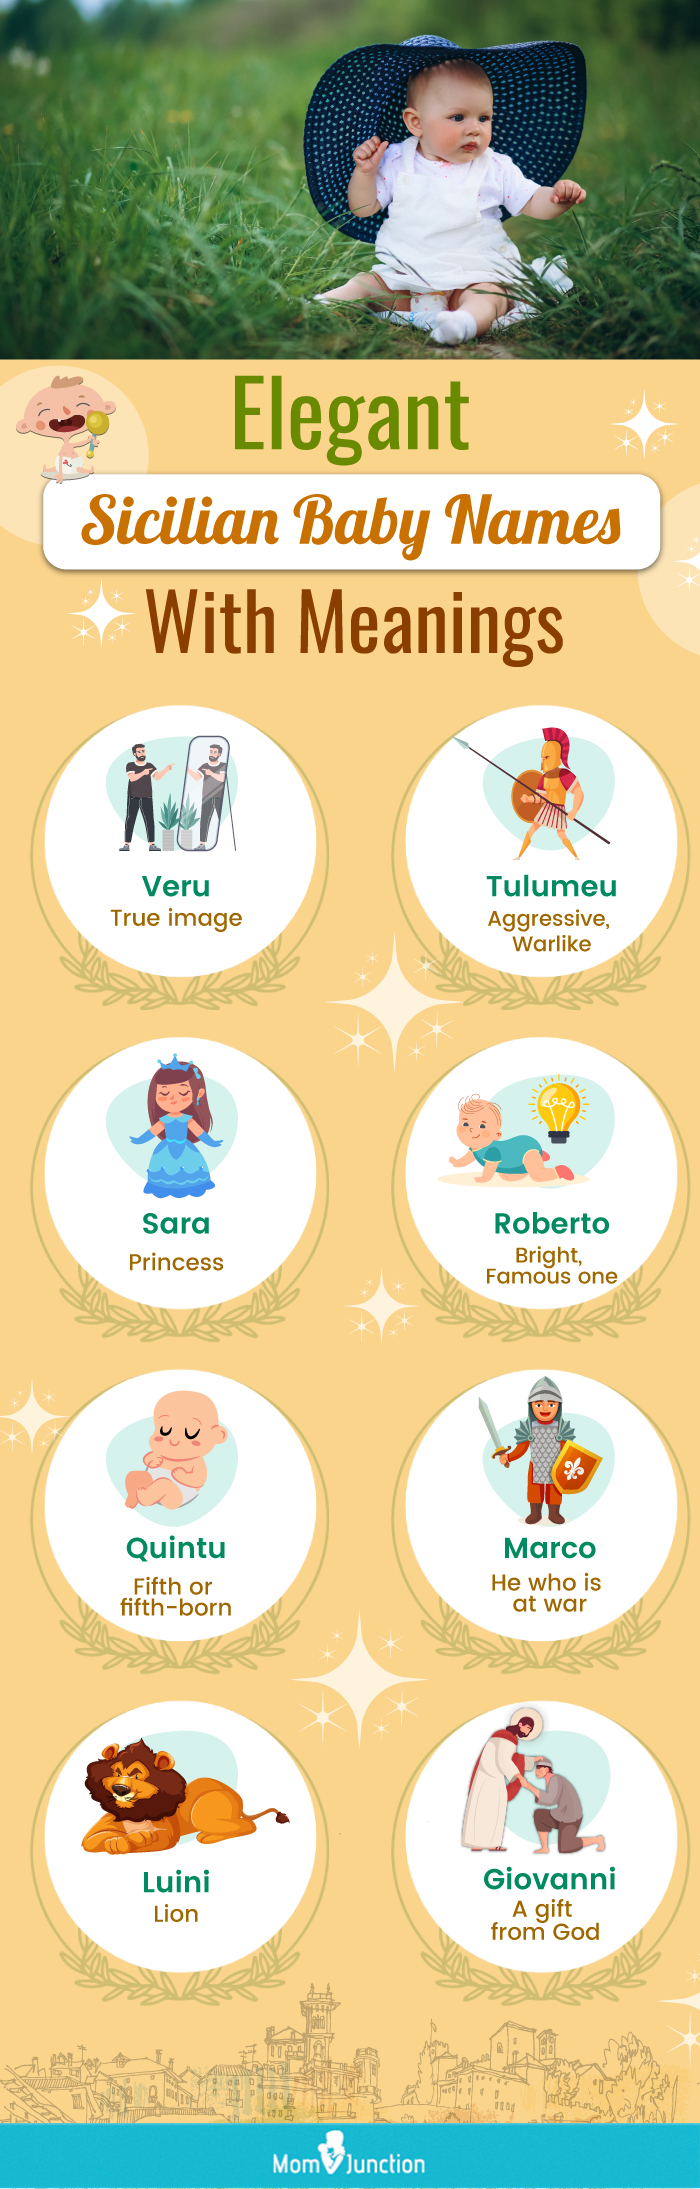 elegant sicilian baby names with meanings (infographic)